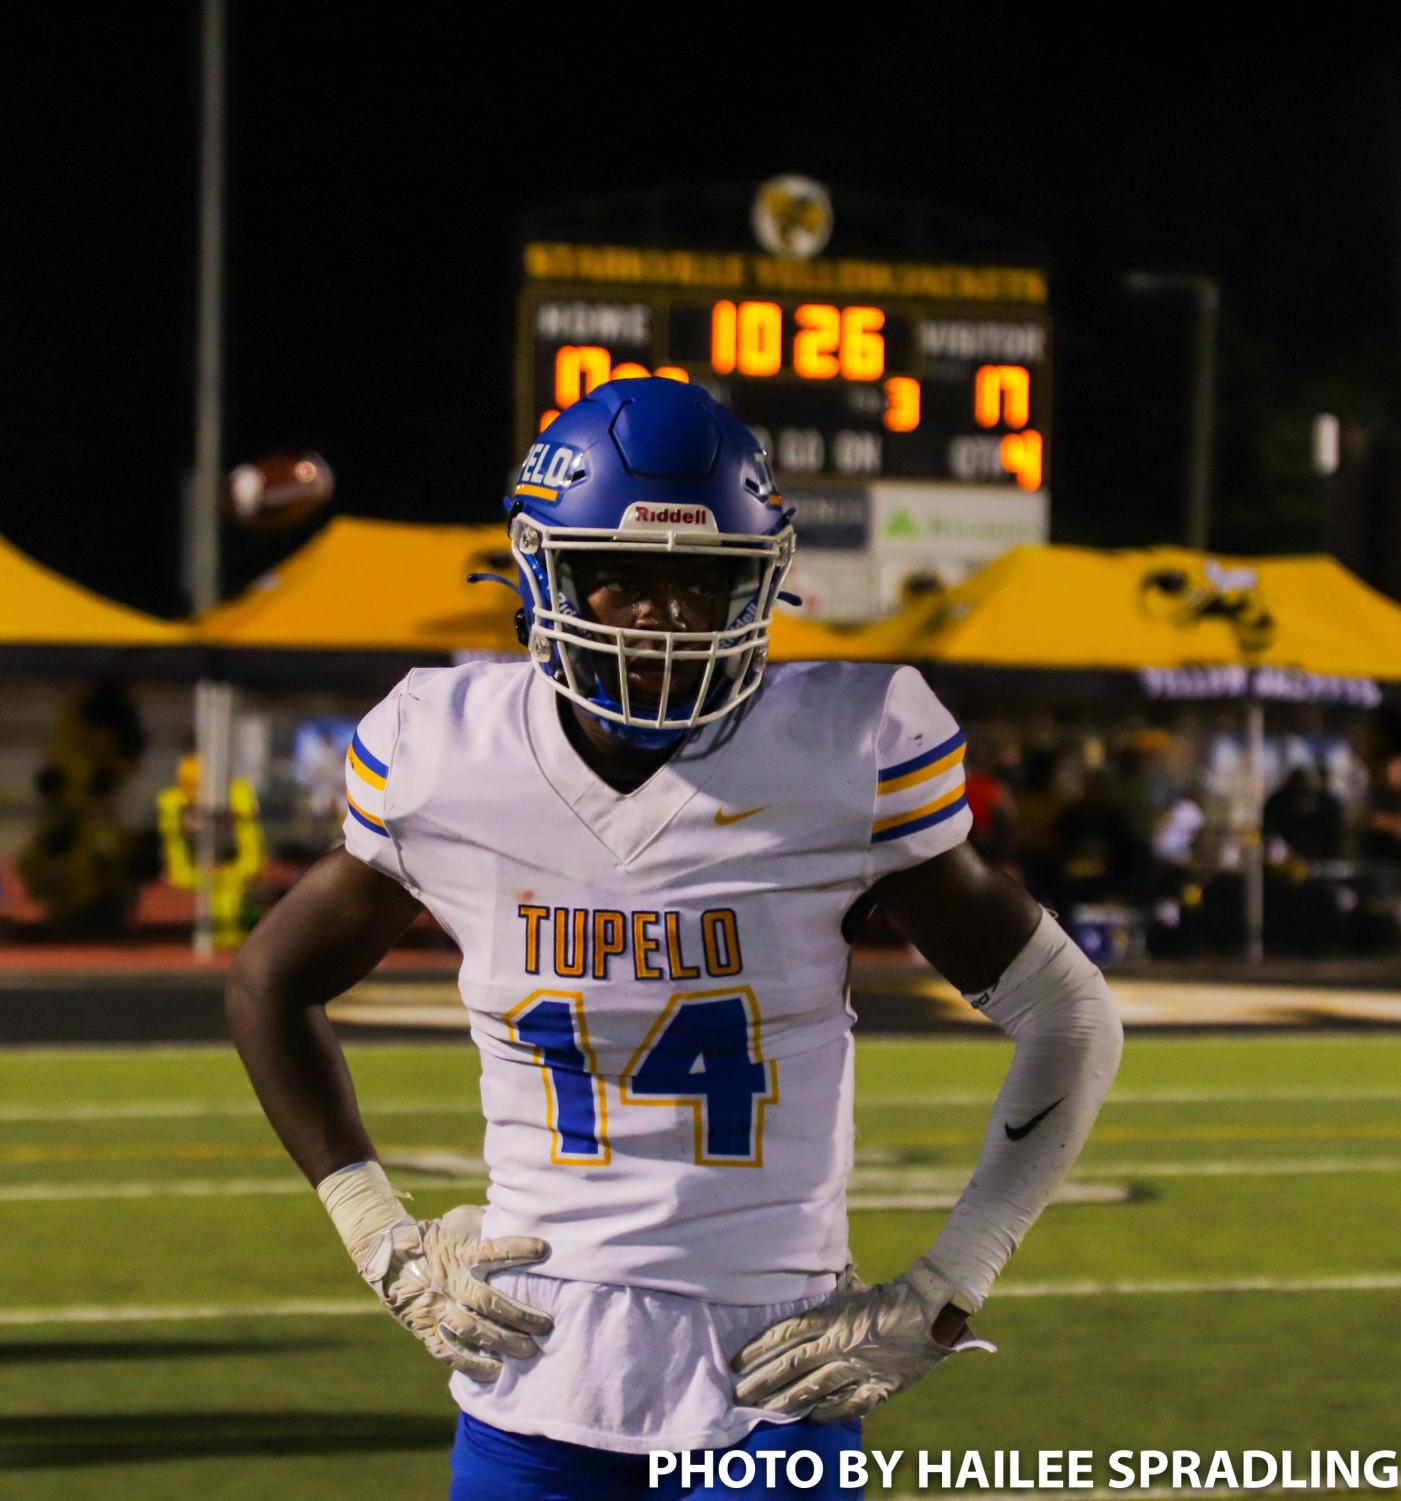 Tupelo+Remains+Undefeated+After+Their+Win+Against+Starkville